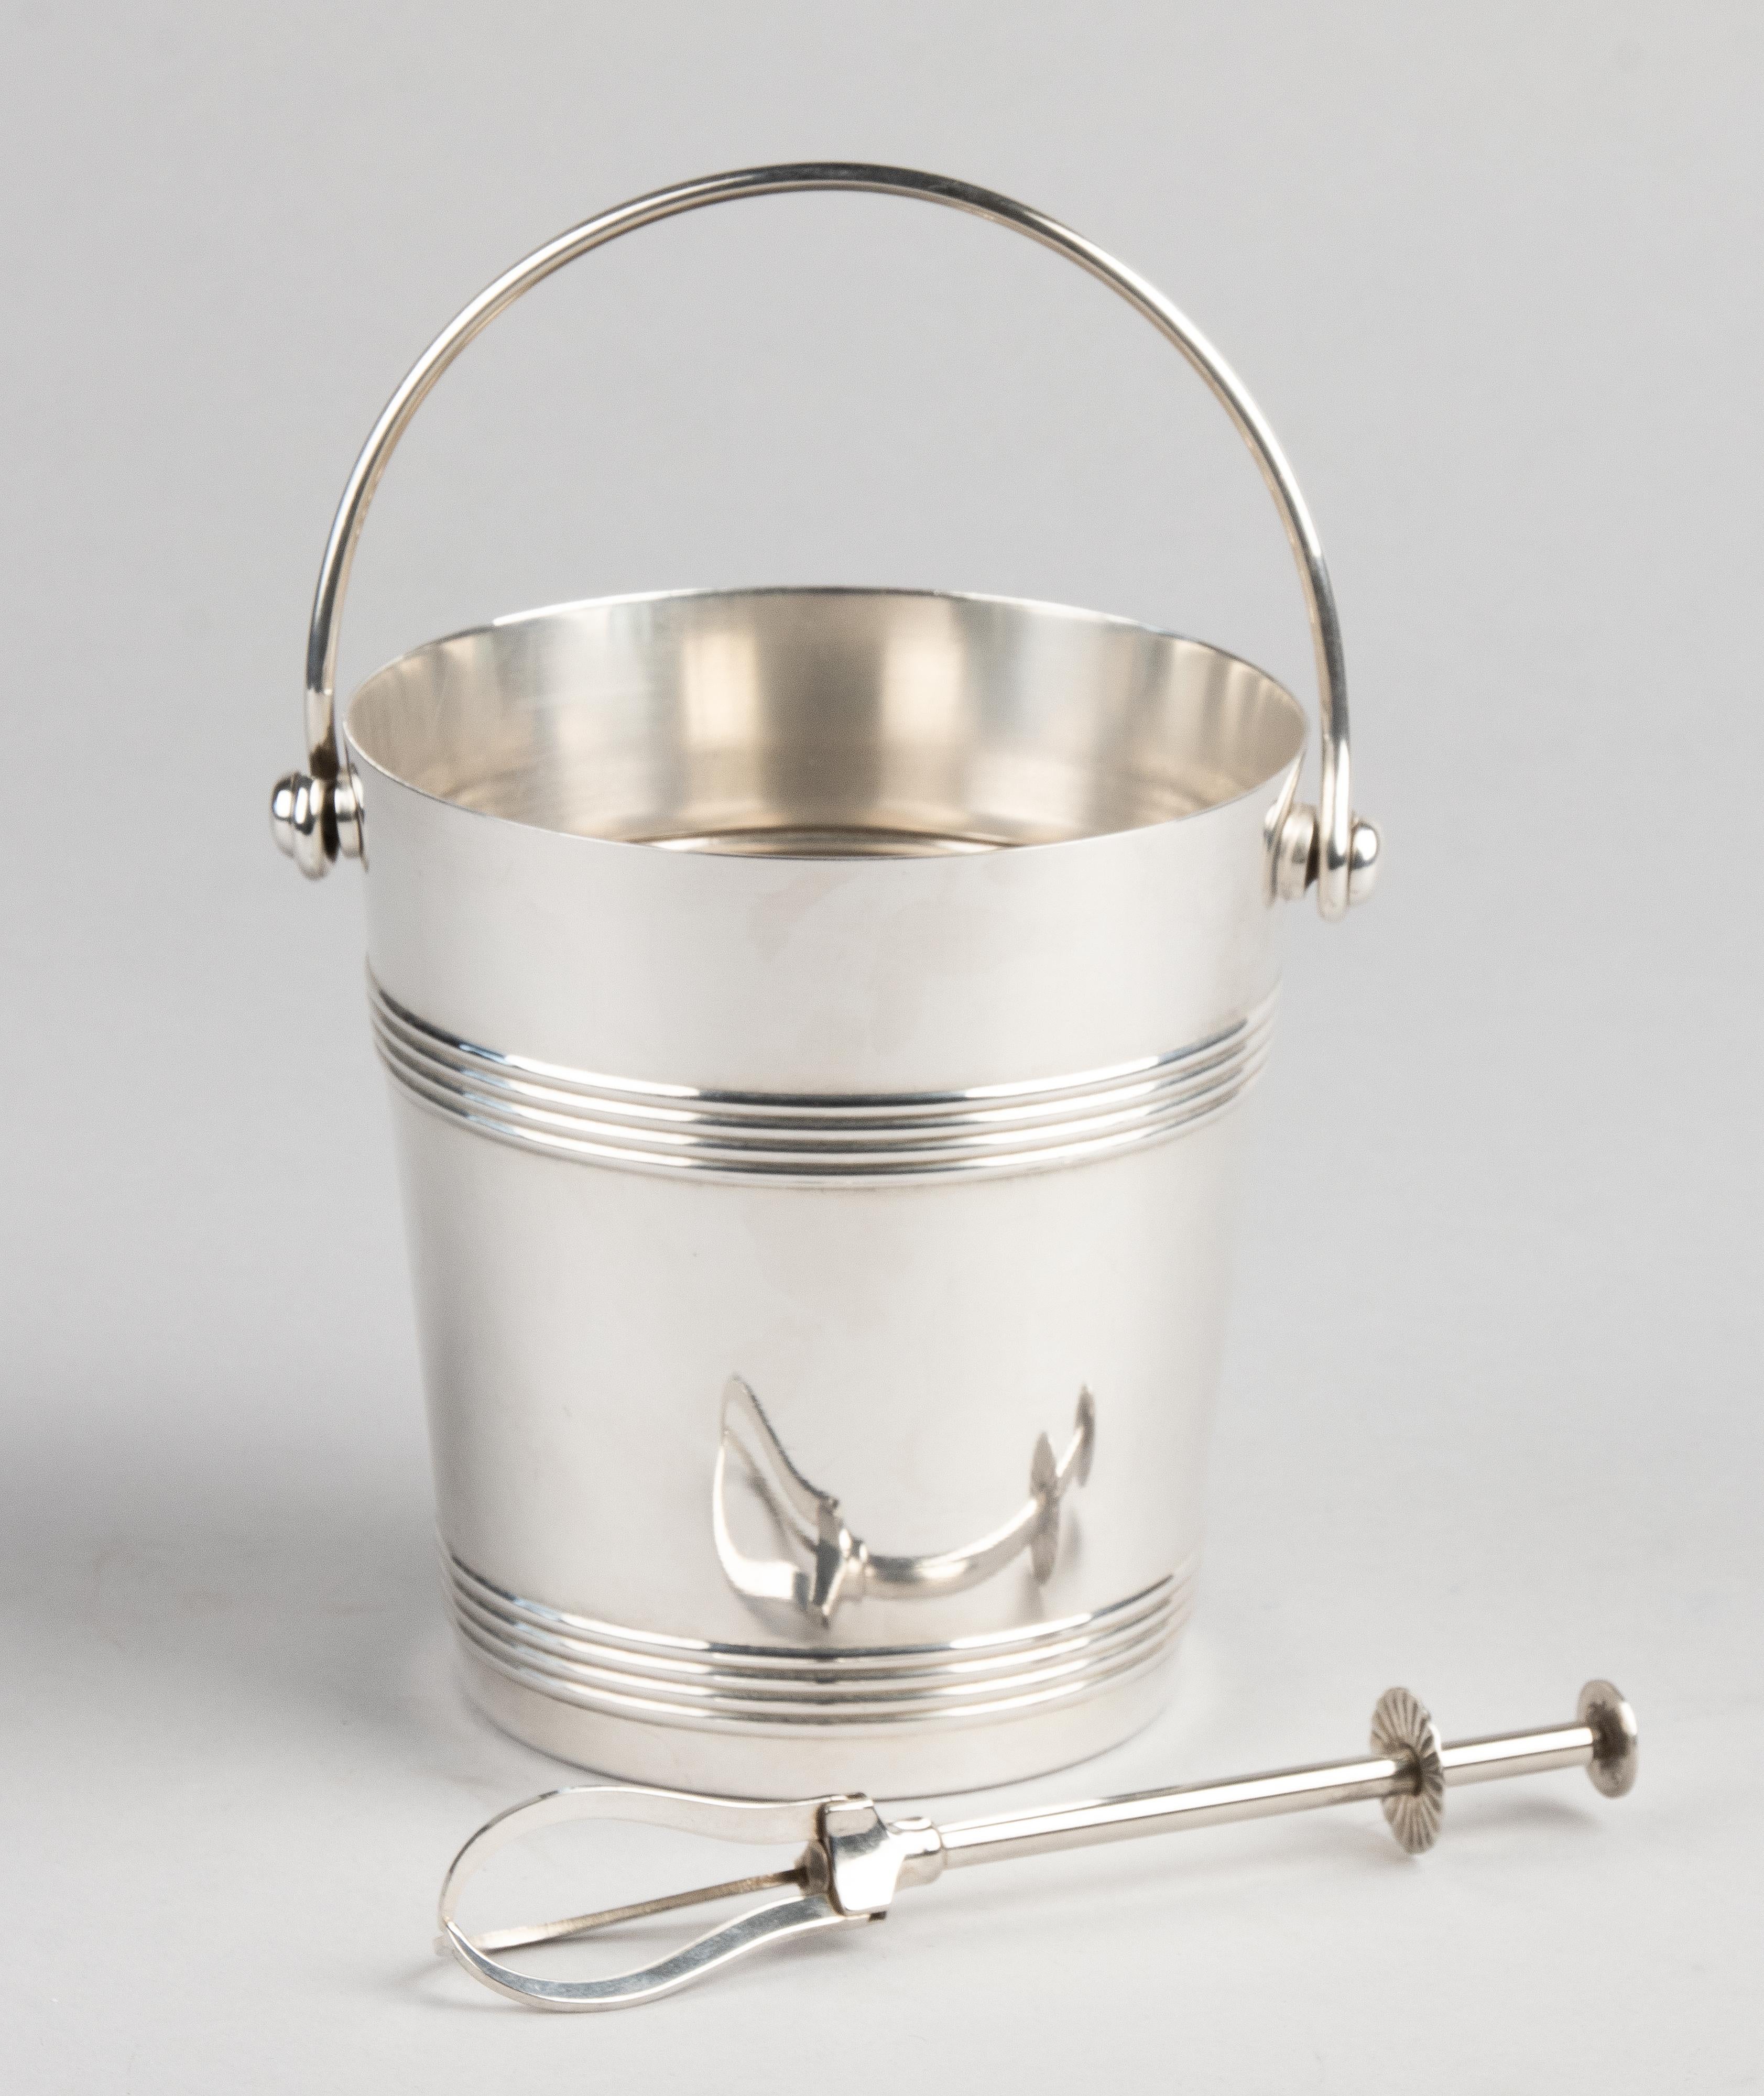 Beautiful silver plated bucket for ice cubes from the French brand Gallia (part of Christofle). On the bottom is a removable plate with holes, for leaking the ice cubes. The bucket is marked on the bottom.
This bucket comes with tongs for taking